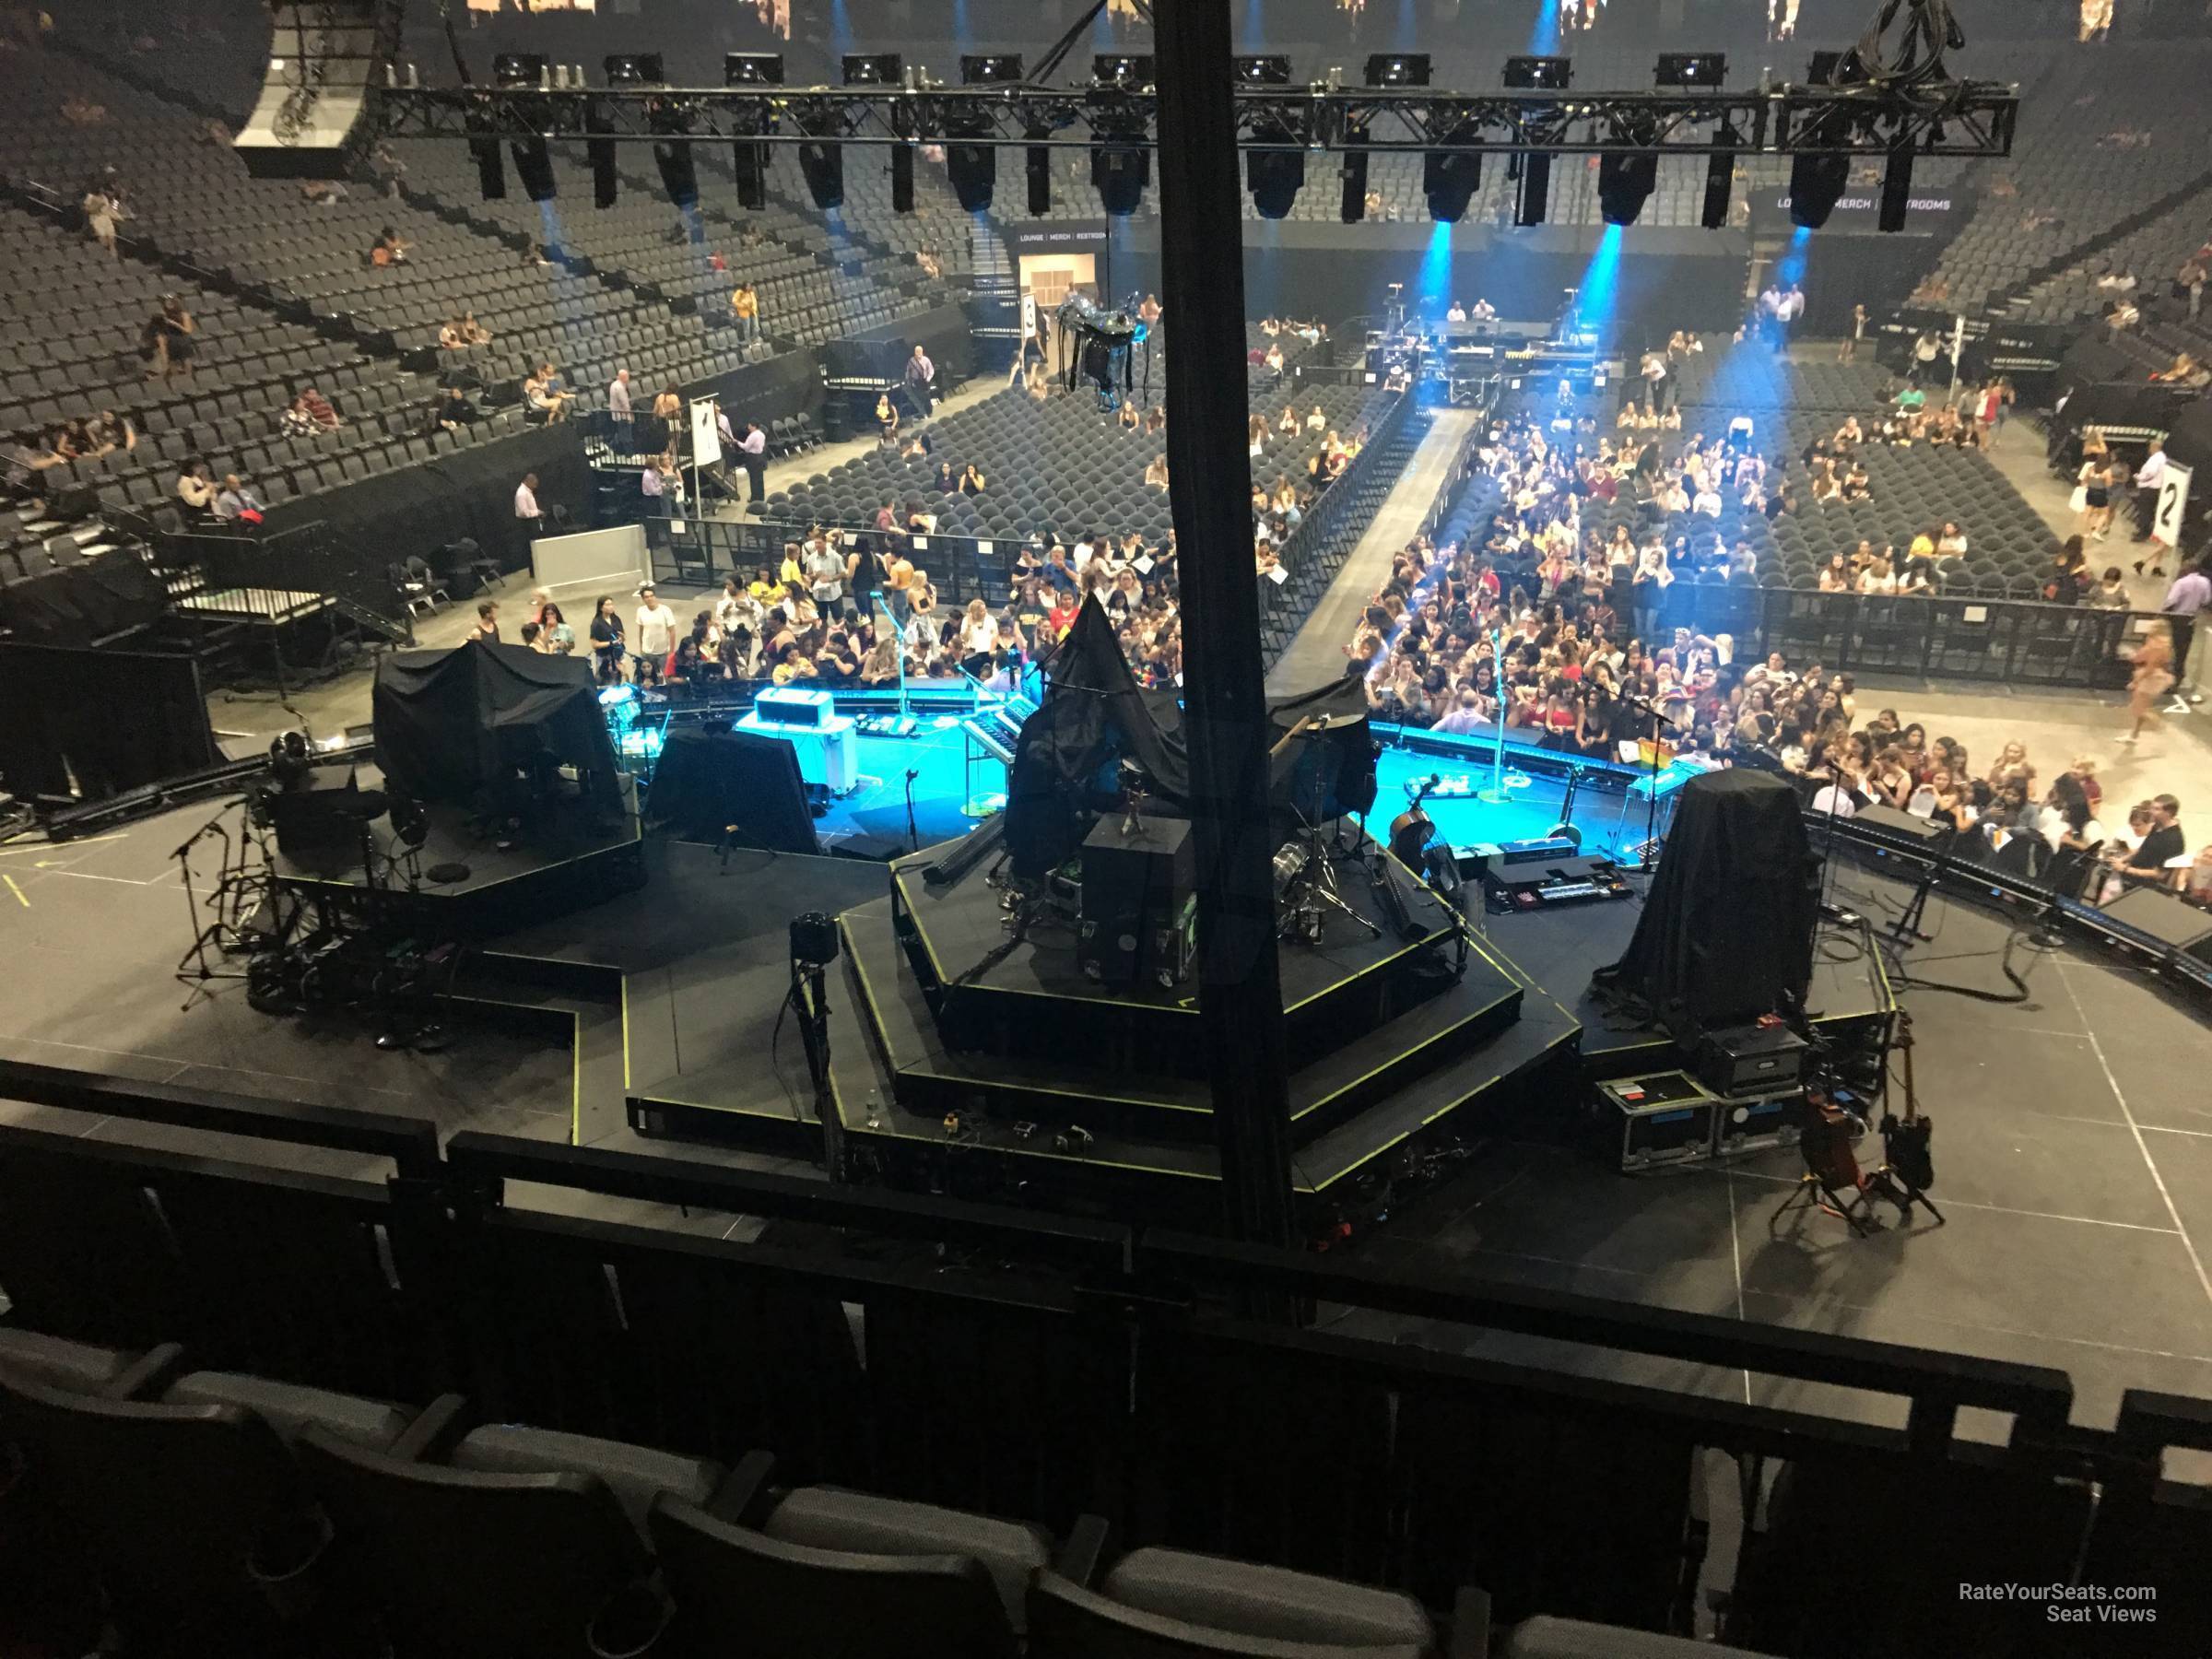 section 126, row a seat view  for concert - golden 1 center